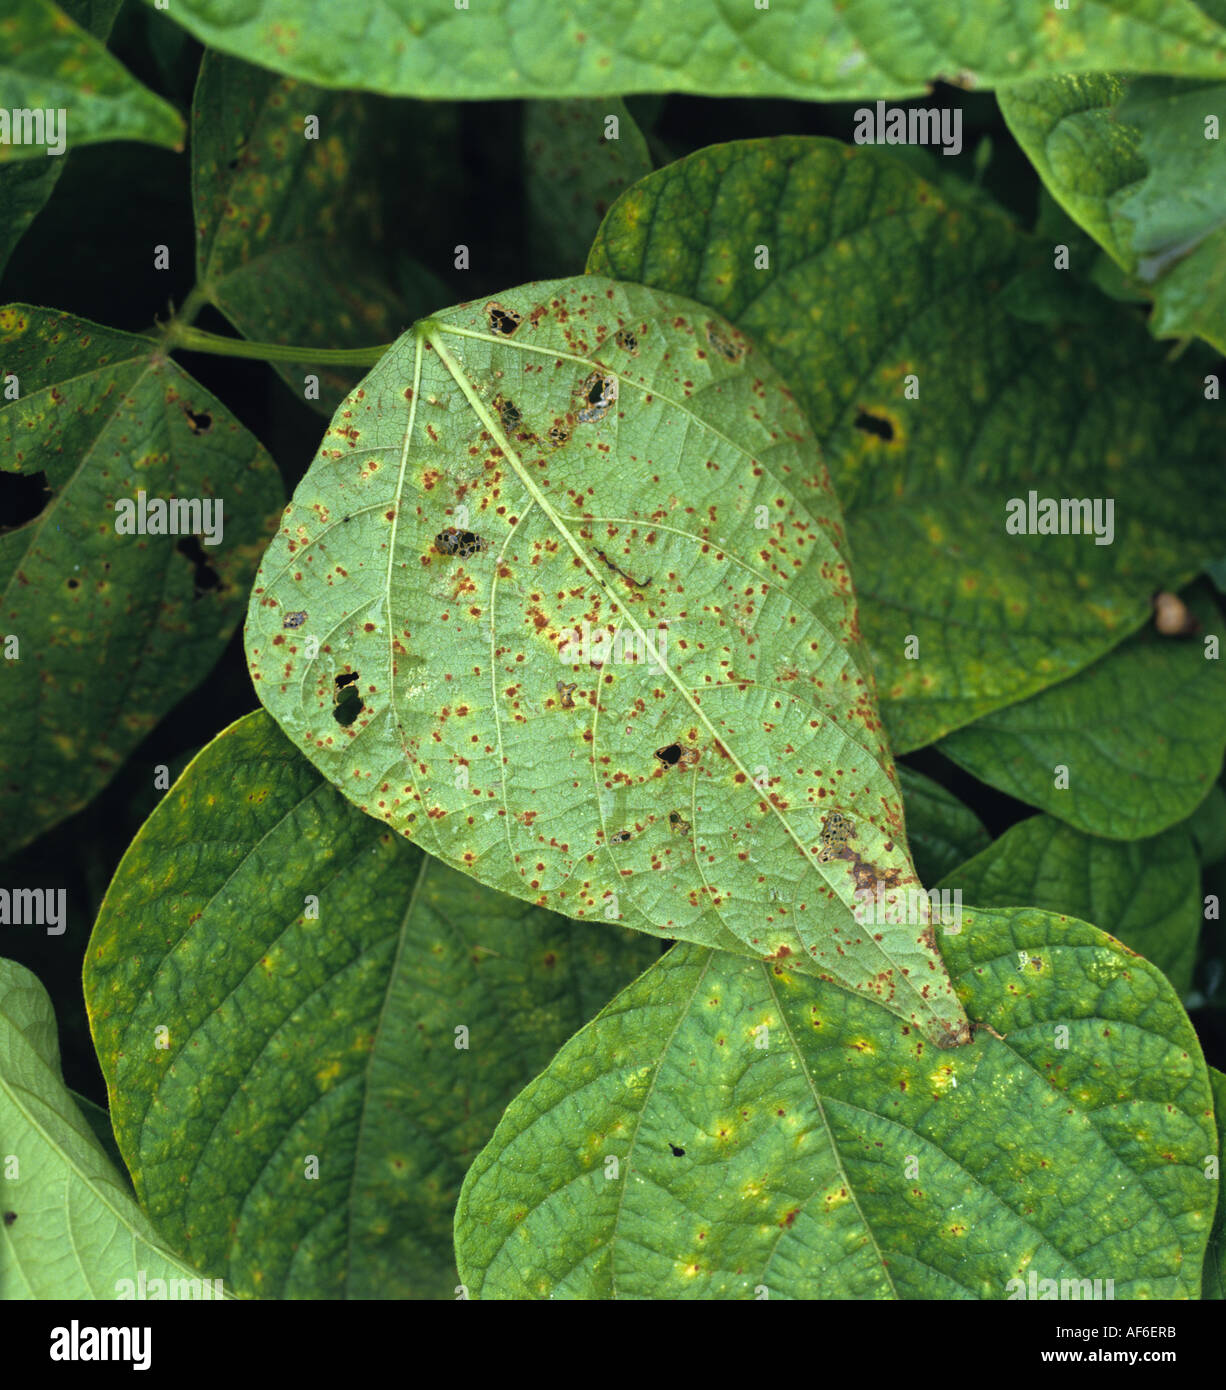 Bean rust Uromyces appendiculatus on phaseolus bean lower leaf surface Stock Photo